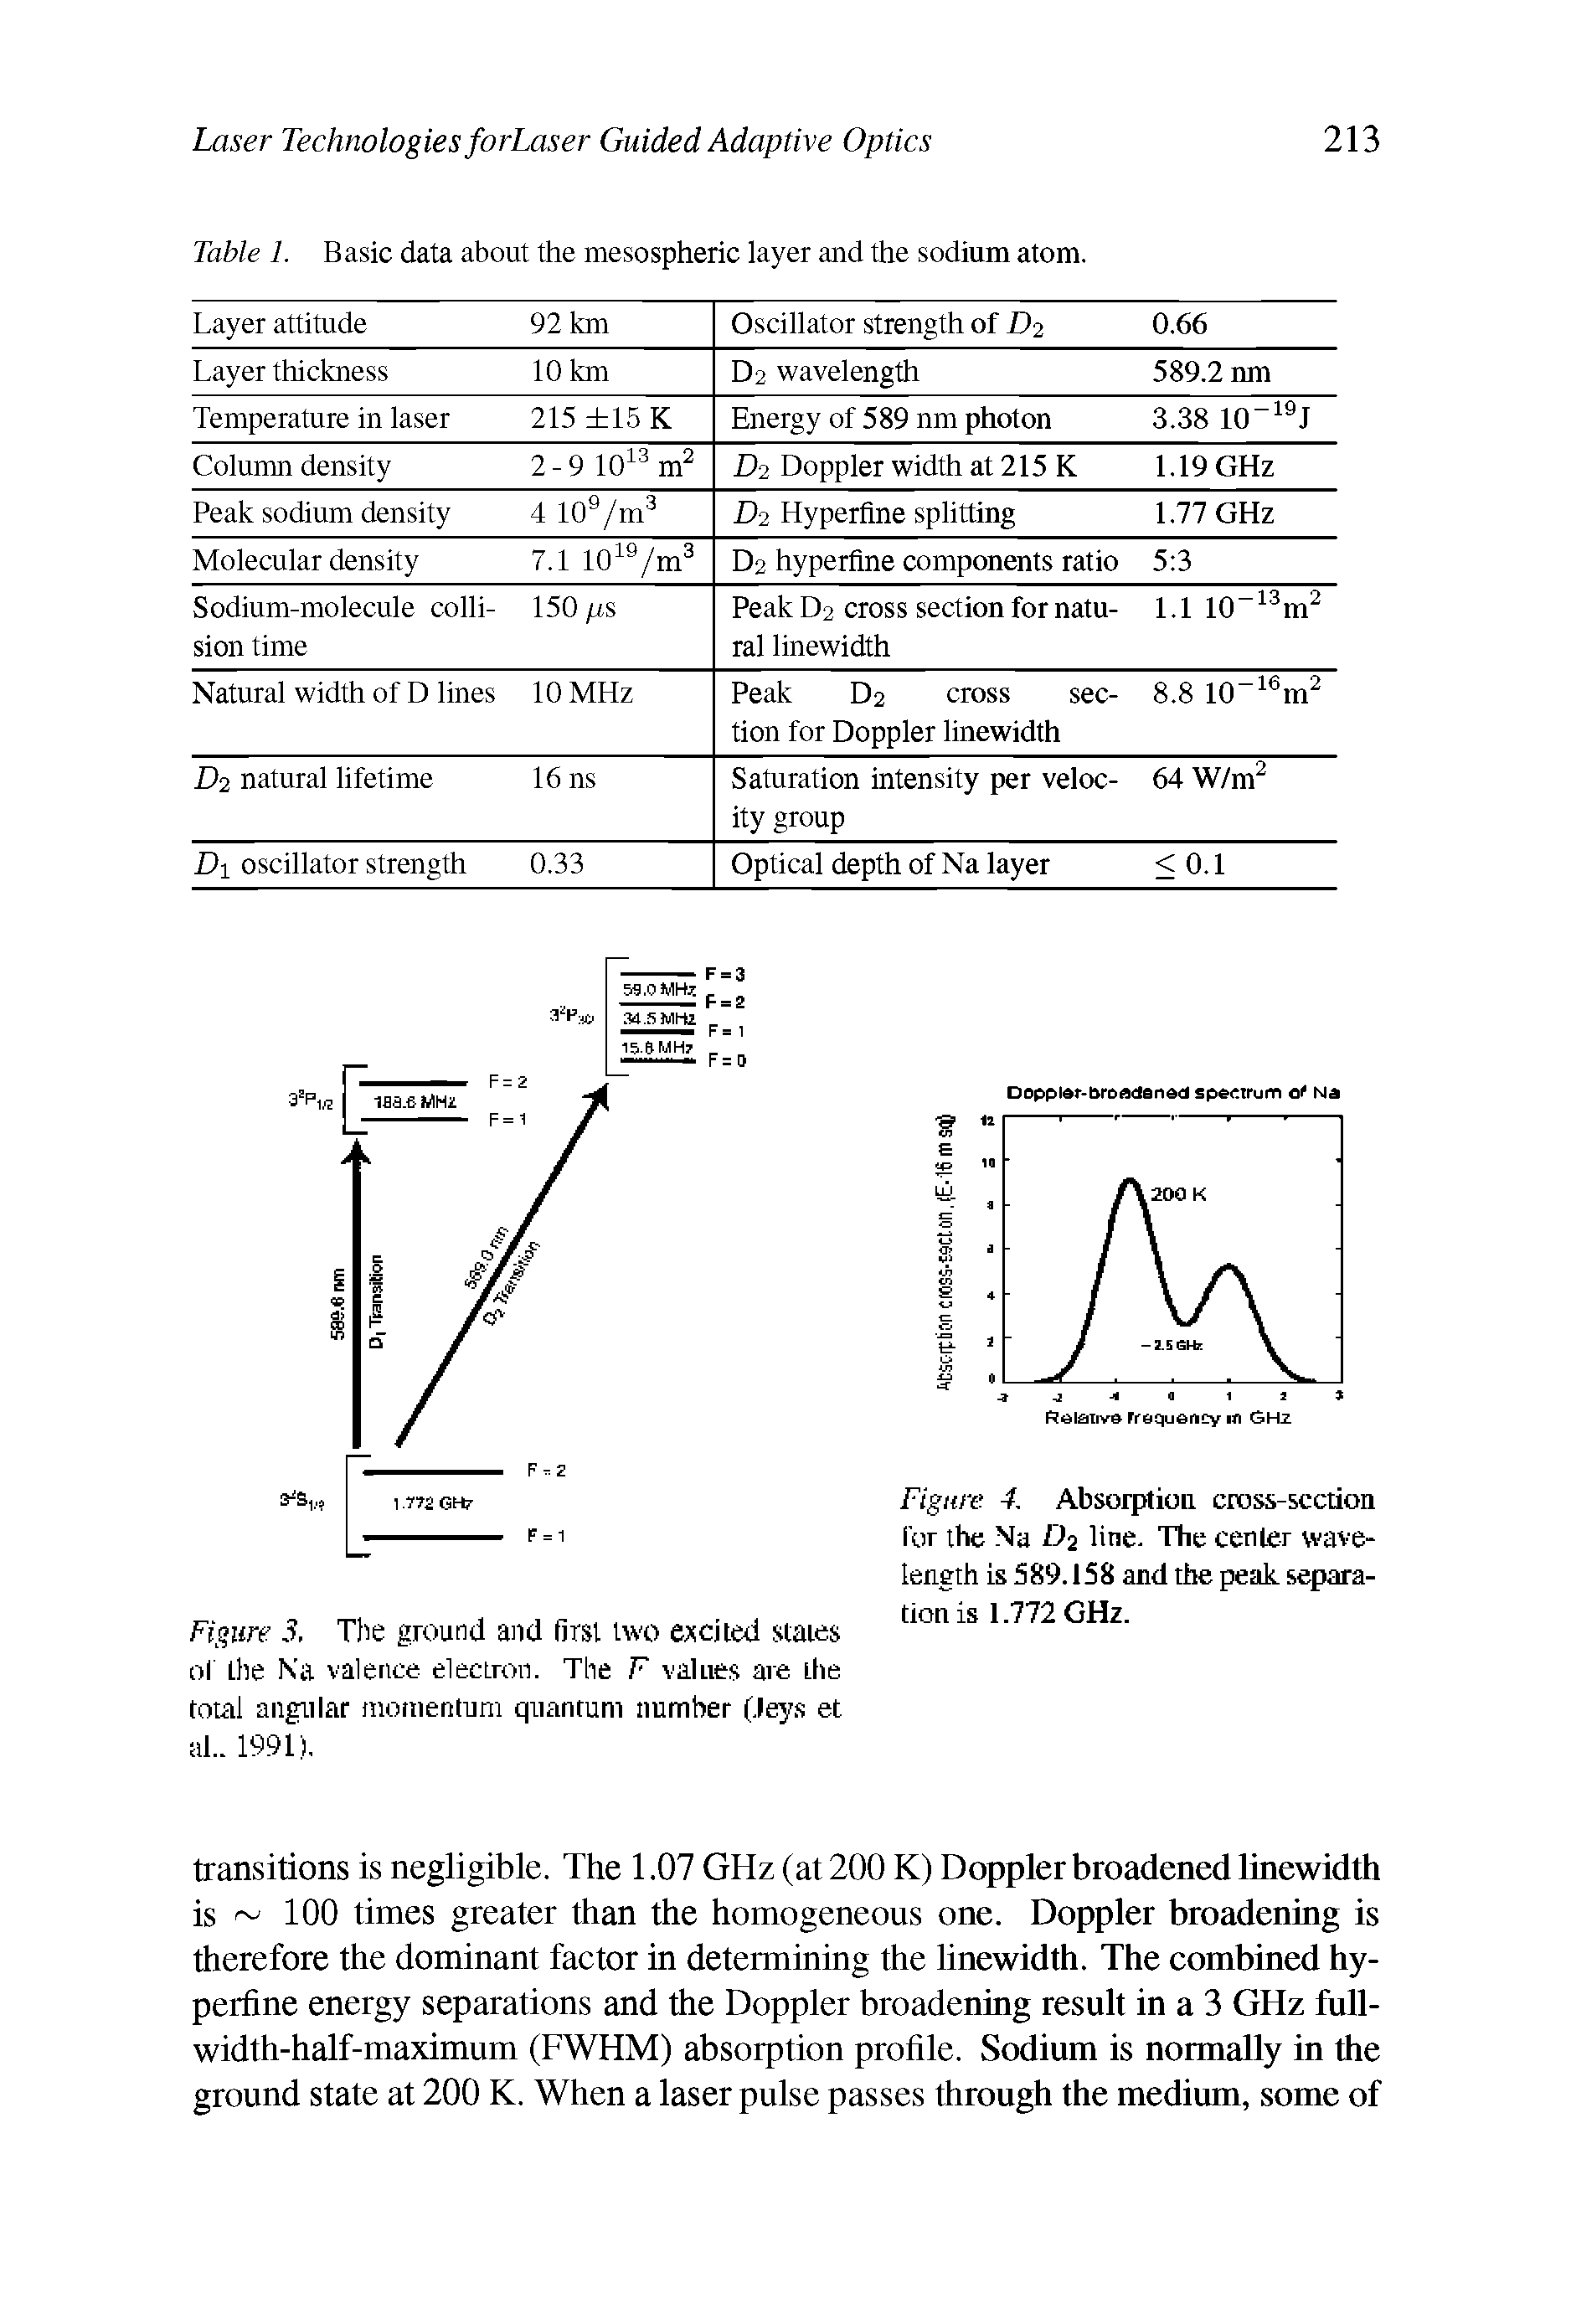 Figure 3. The ground and first two e ncjted states or the Na valence electron. The F values are the total angular momentum quantum number (.Peys et ill.. 1991).